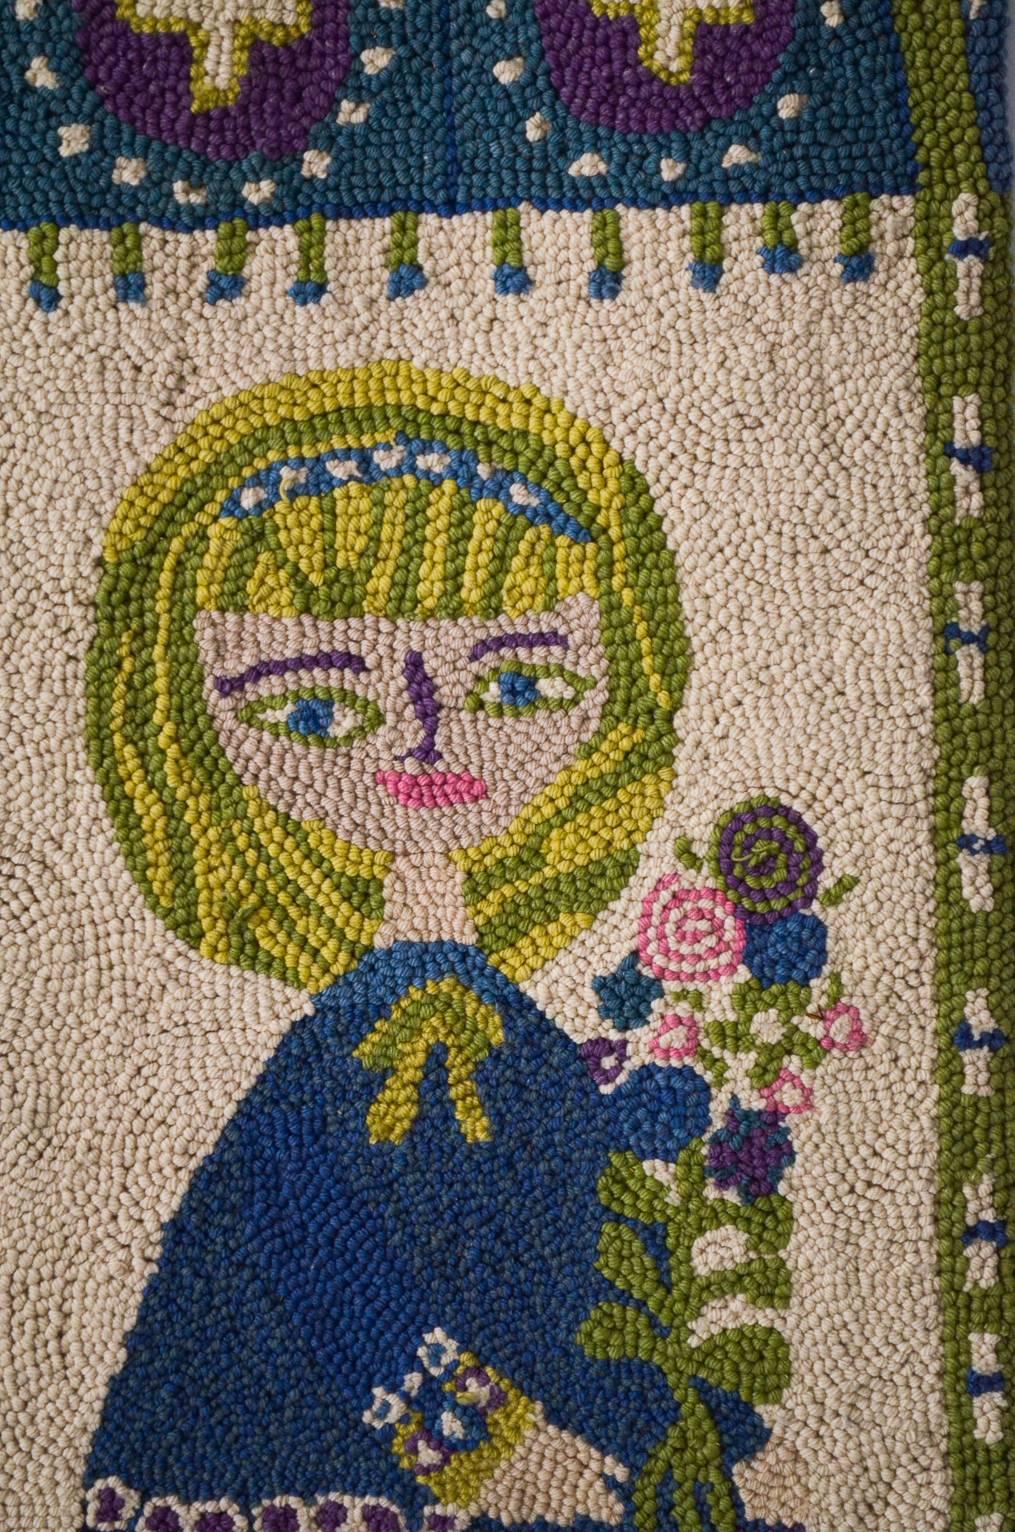 Mid-Century Modern Evelyn Ackerman Girl with Flowers Tapestry